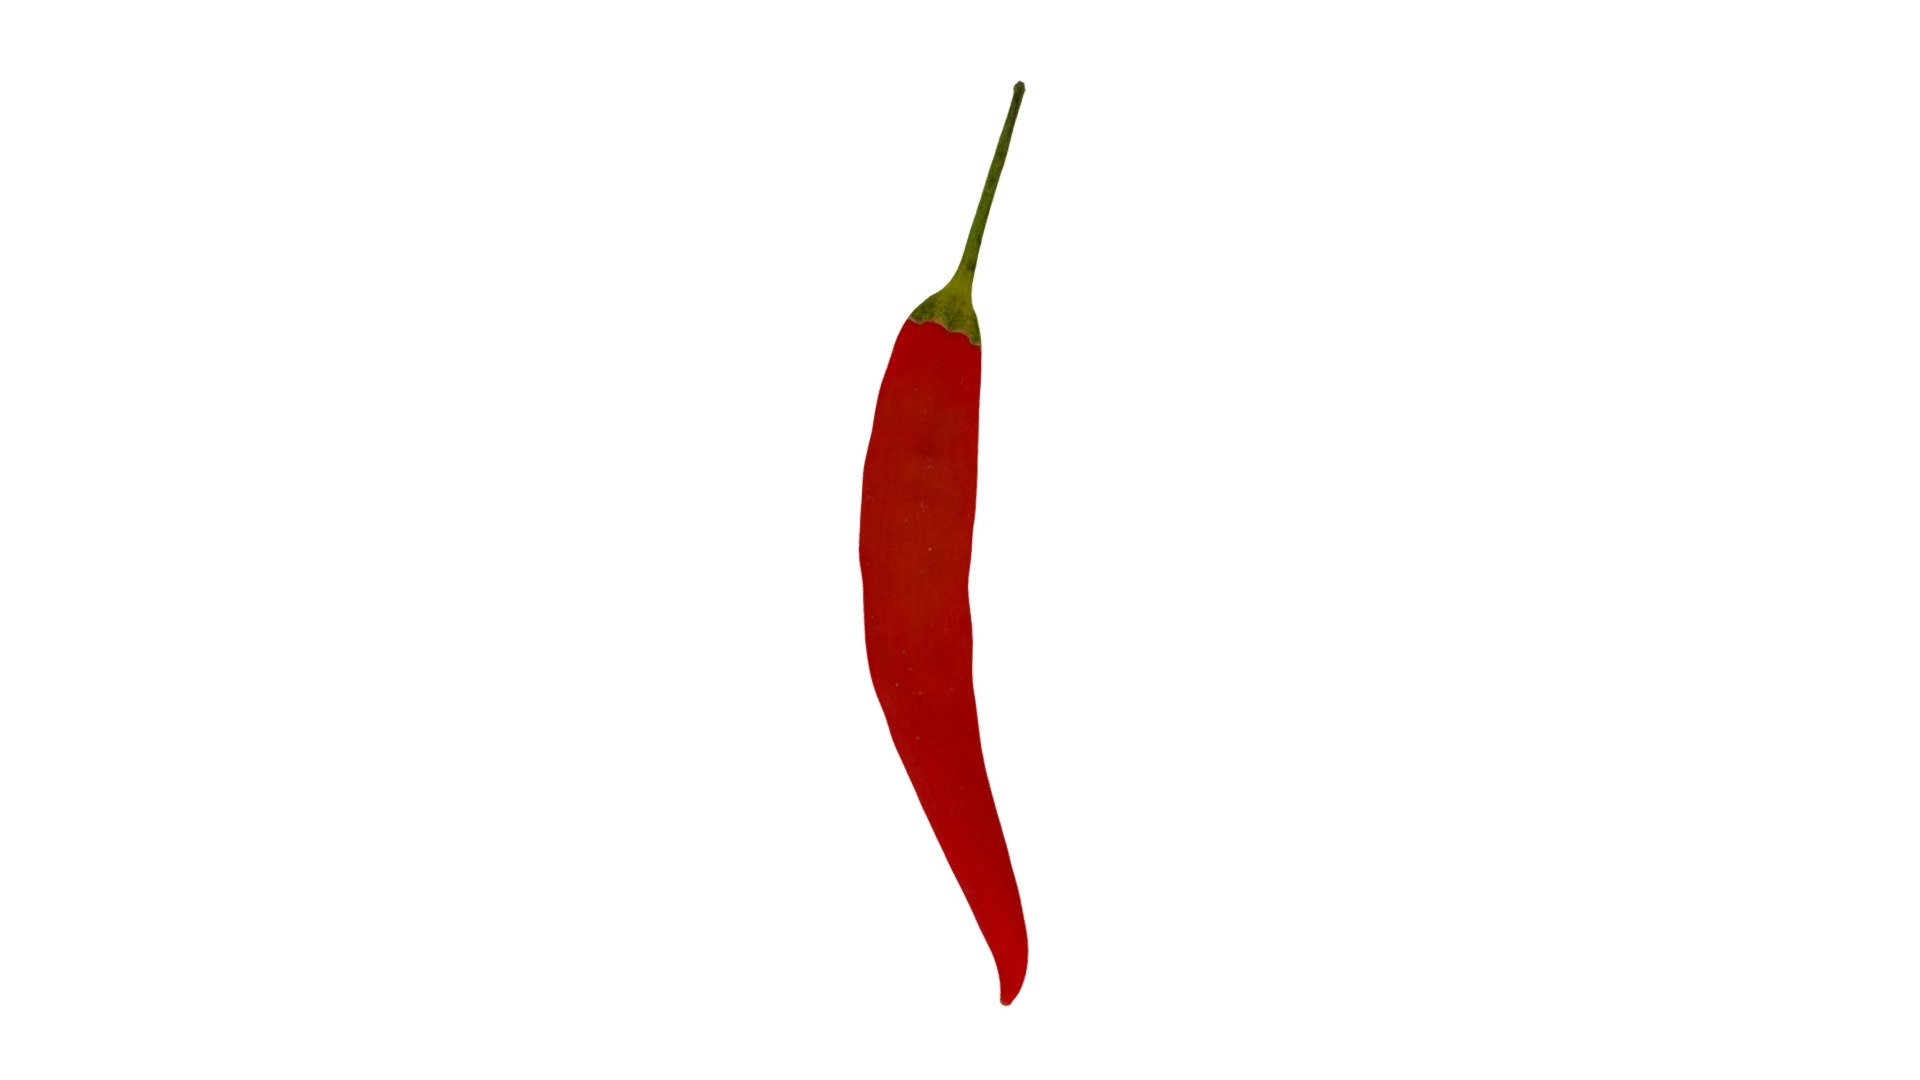 Highly detailed, photorealistic, 3d scanned model of a red chili. 8k textures maps, optimized topology and uv unwrapped.

Model shown here is lowpoly with diffuse map only and 4k texture size.

This model is available at www.thecreativecrops.com 3d model